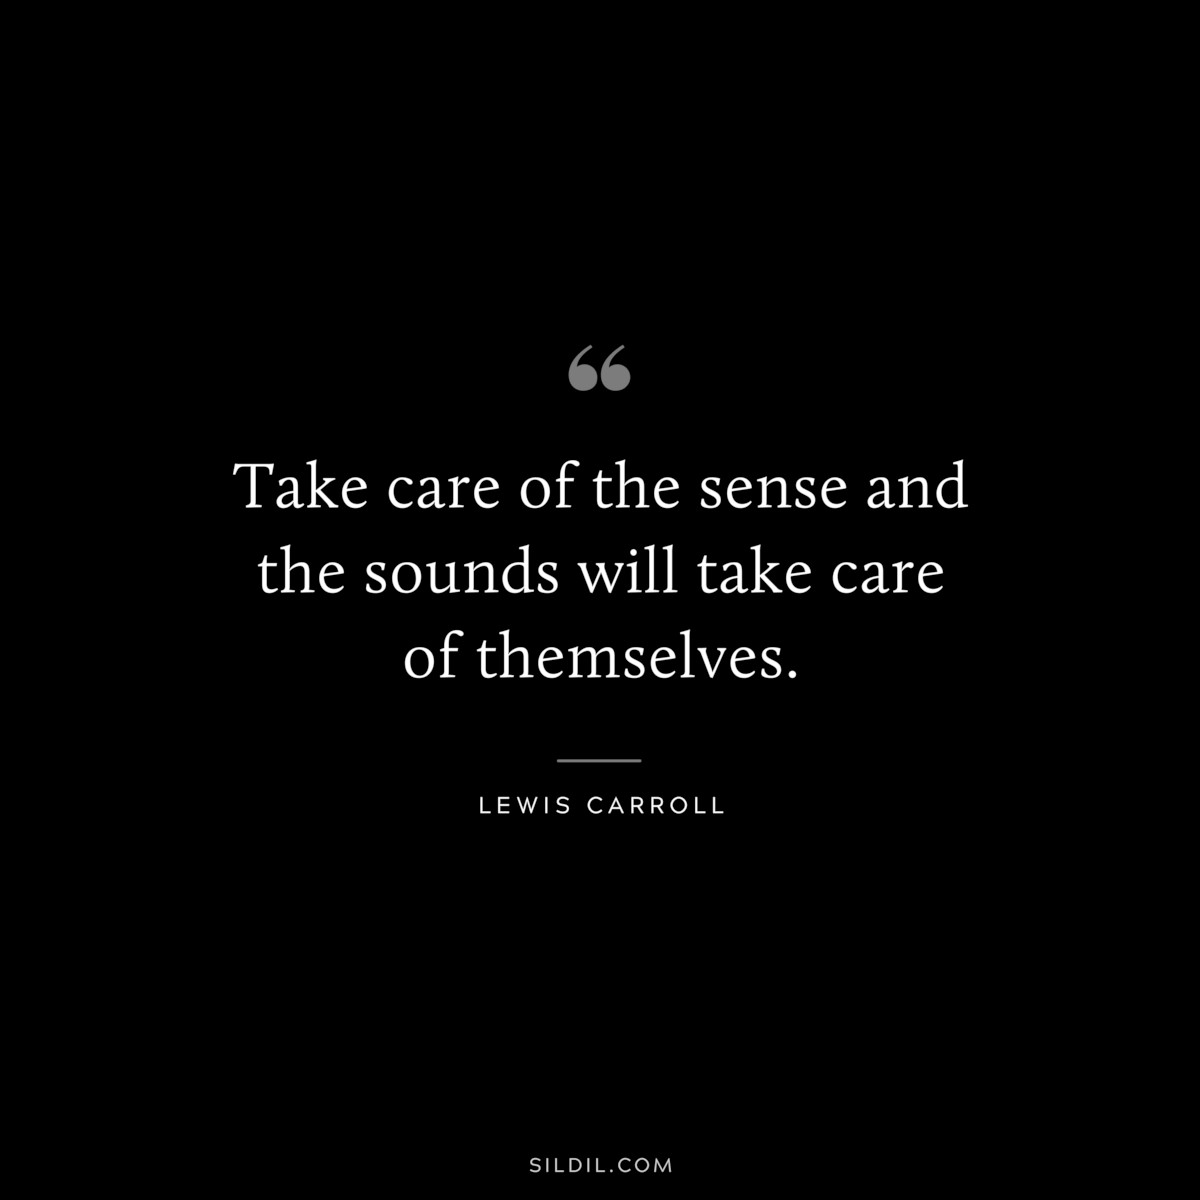 Take care of the sense and the sounds will take care of themselves.